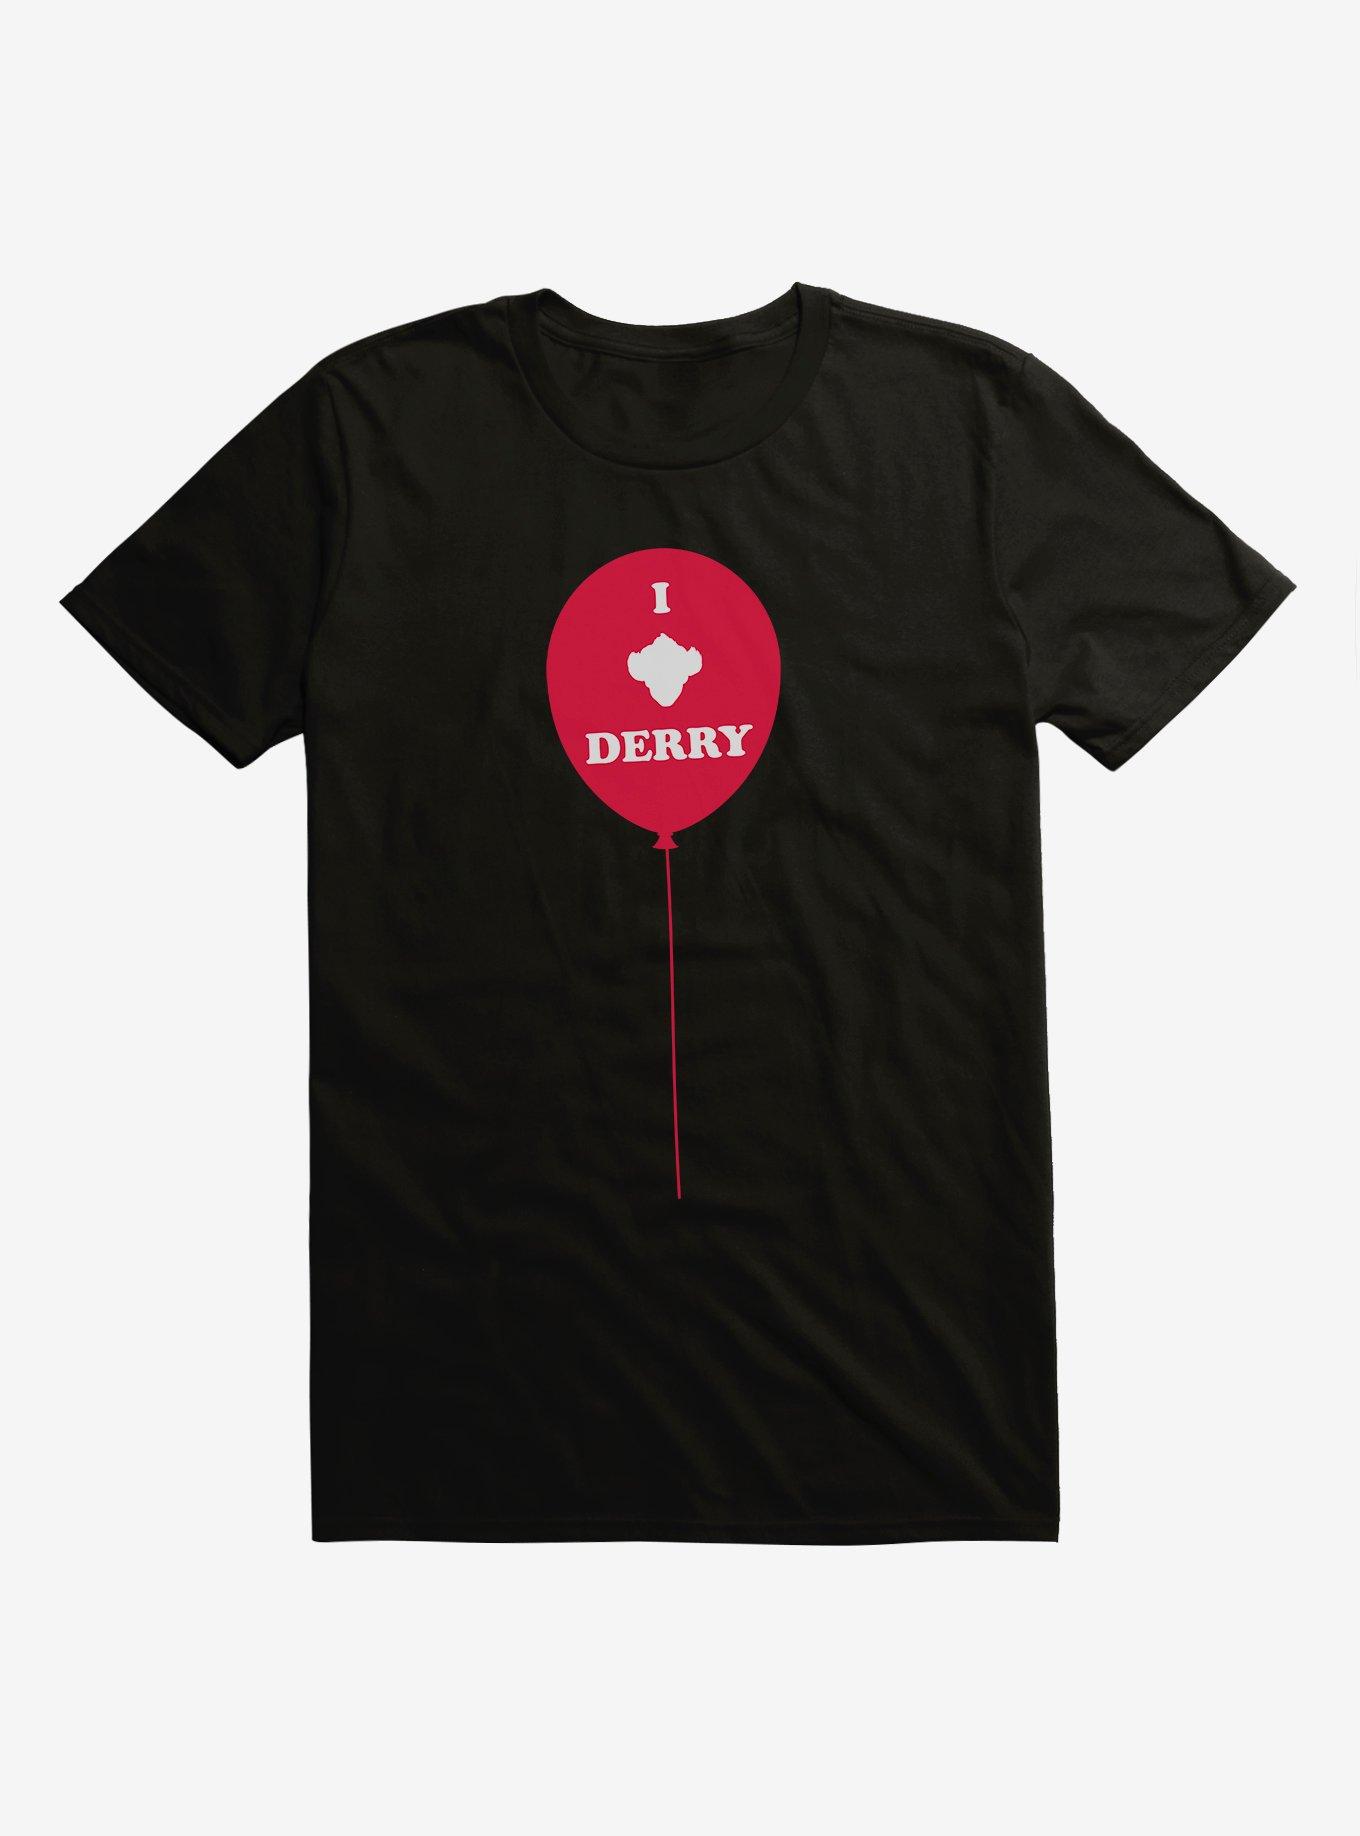 IT Chapter Two I Pennywise Derry Balloon T-Shirt, BLACK, hi-res